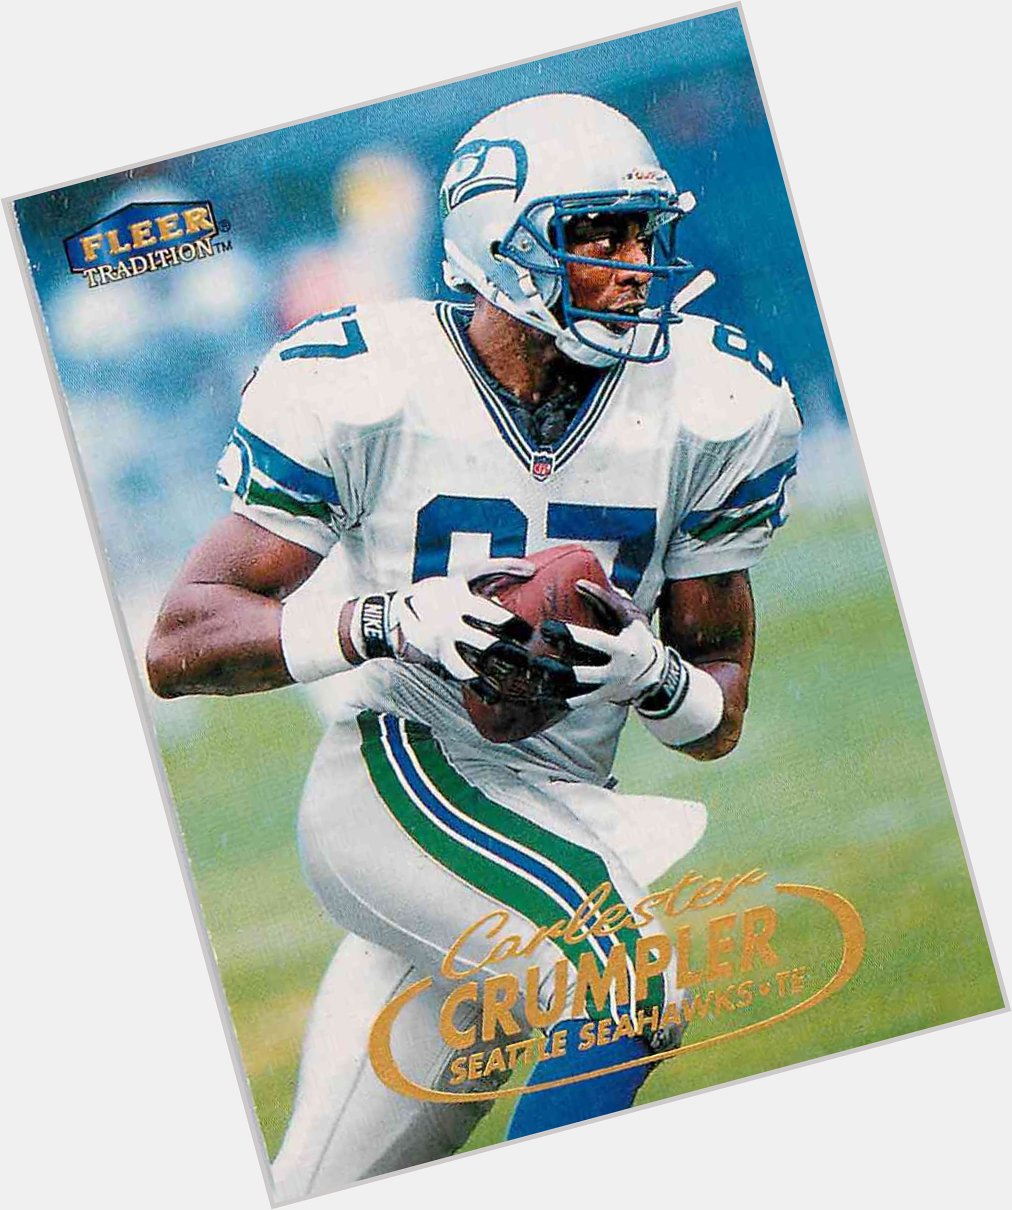 Happy 48th birthday to one of the best names in sports history, Carlester Crumpler. 